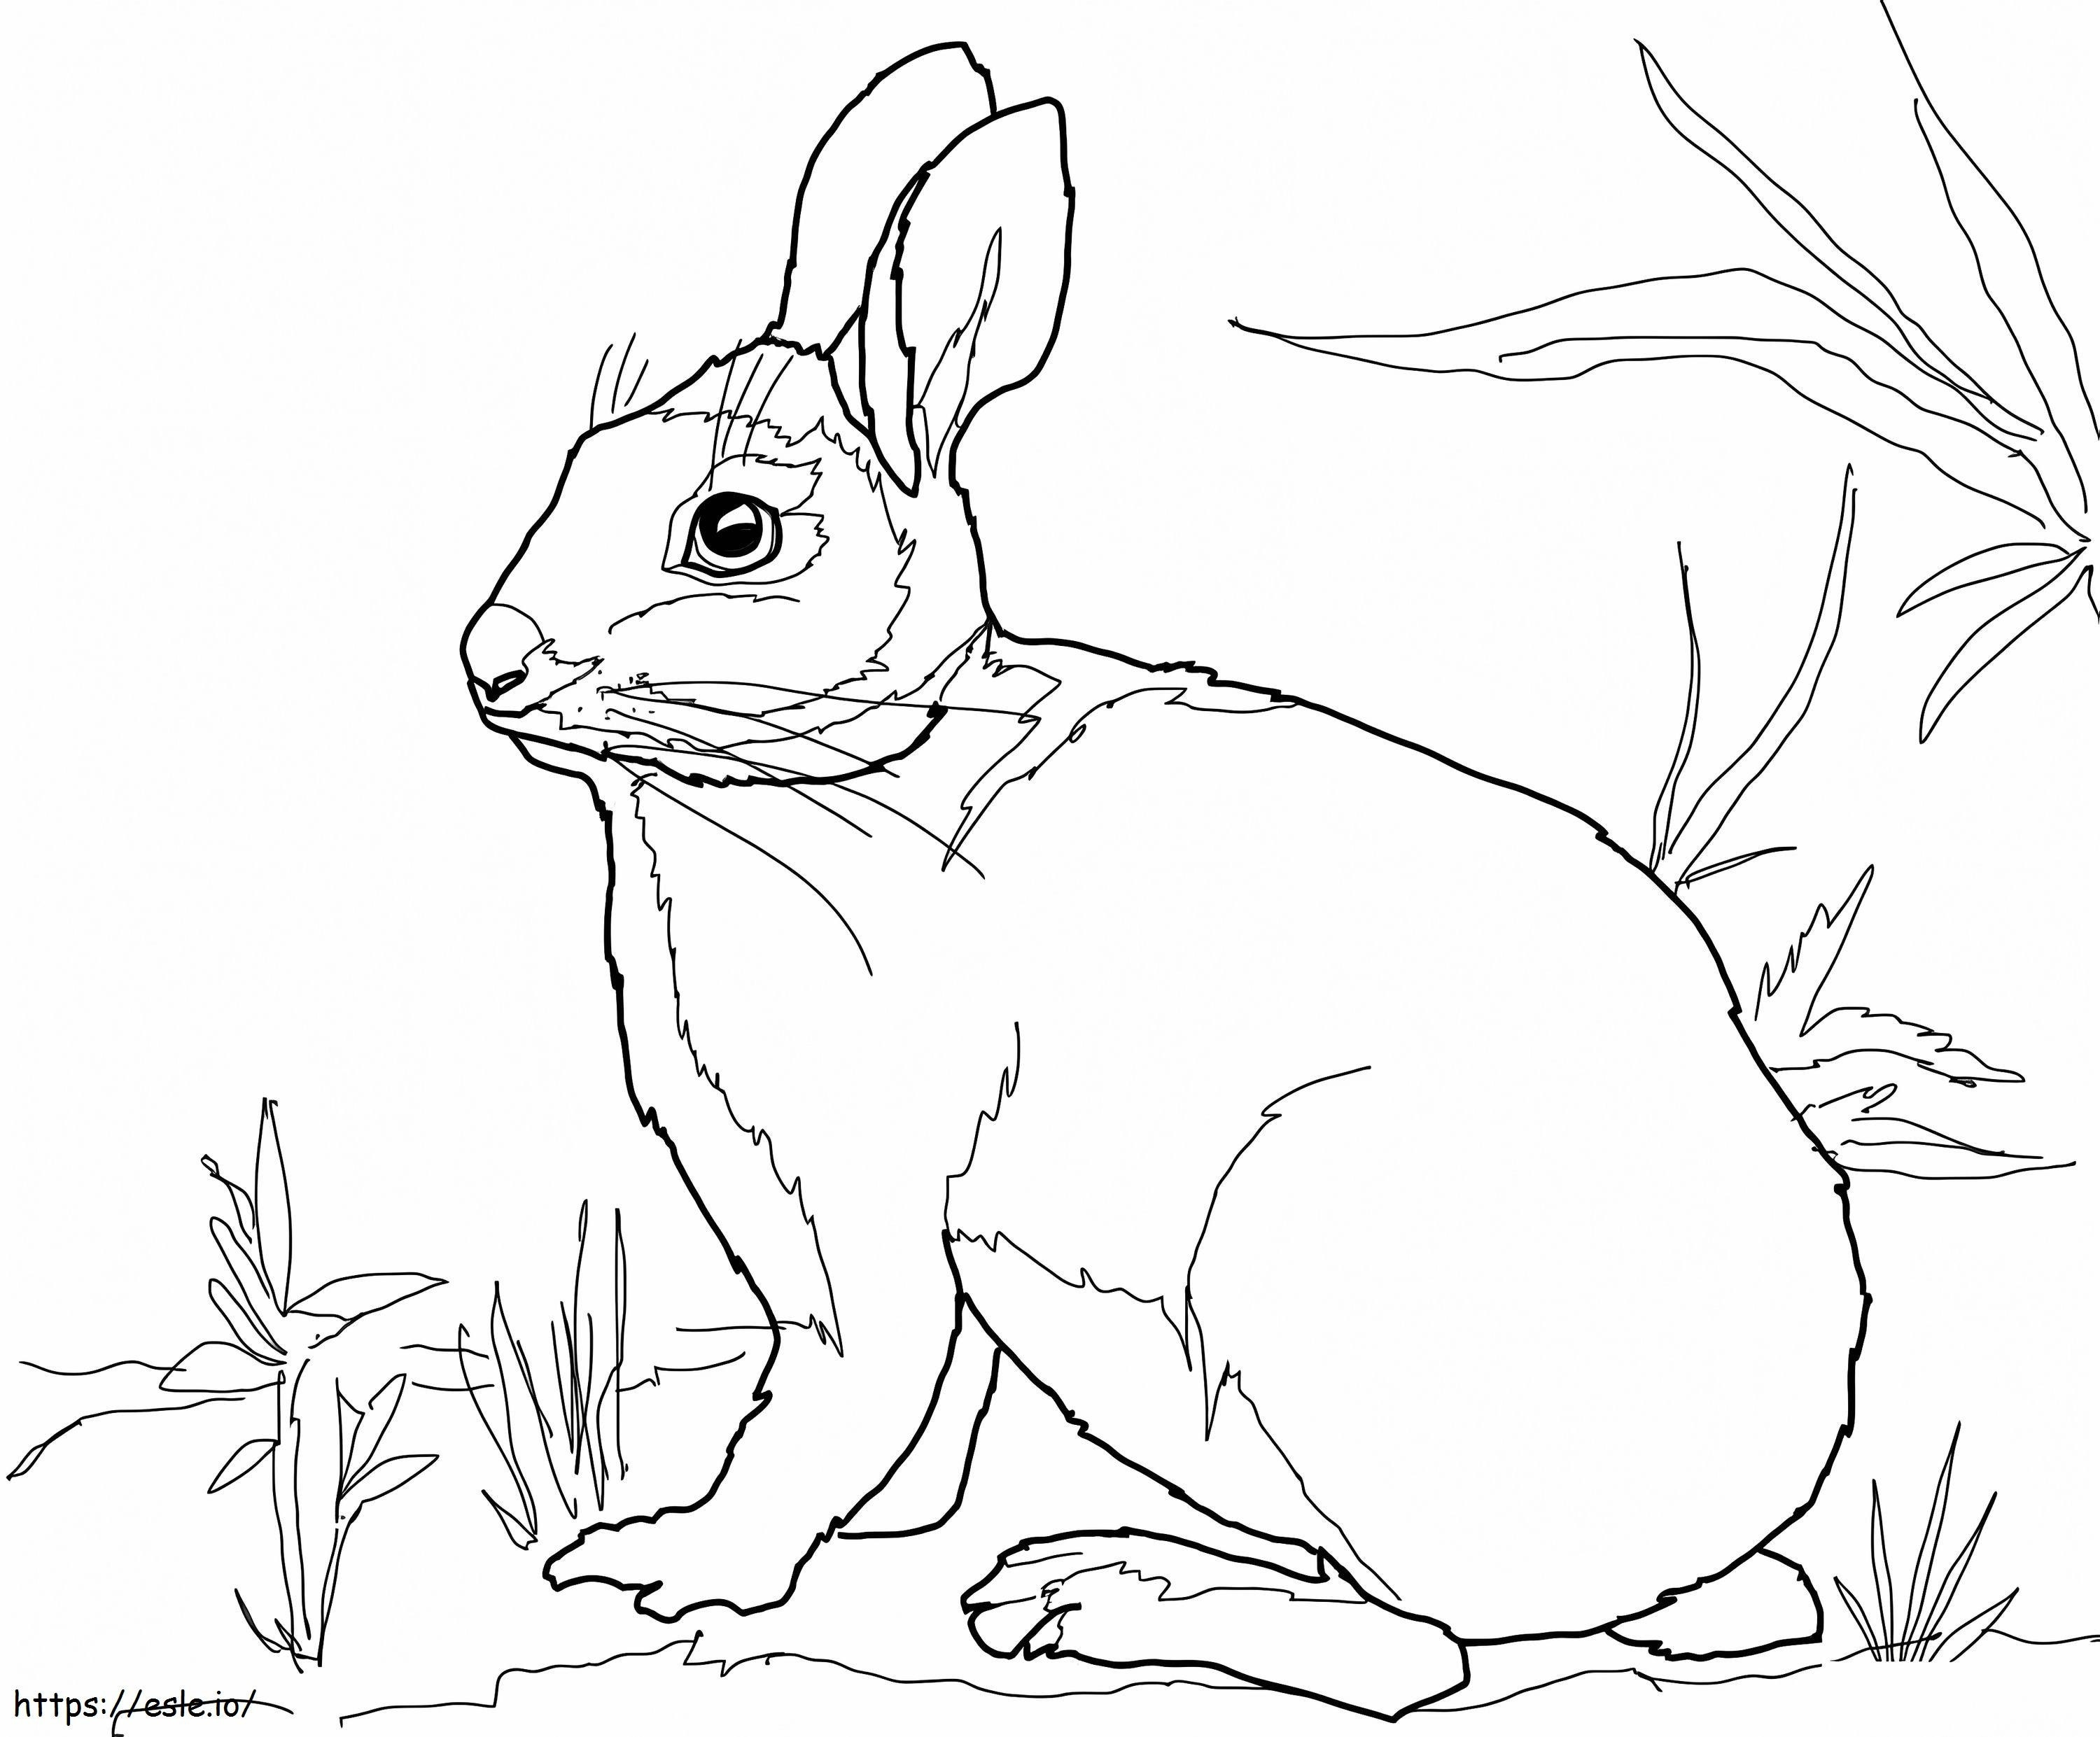 White Tailed Rabbit In The Grass coloring page